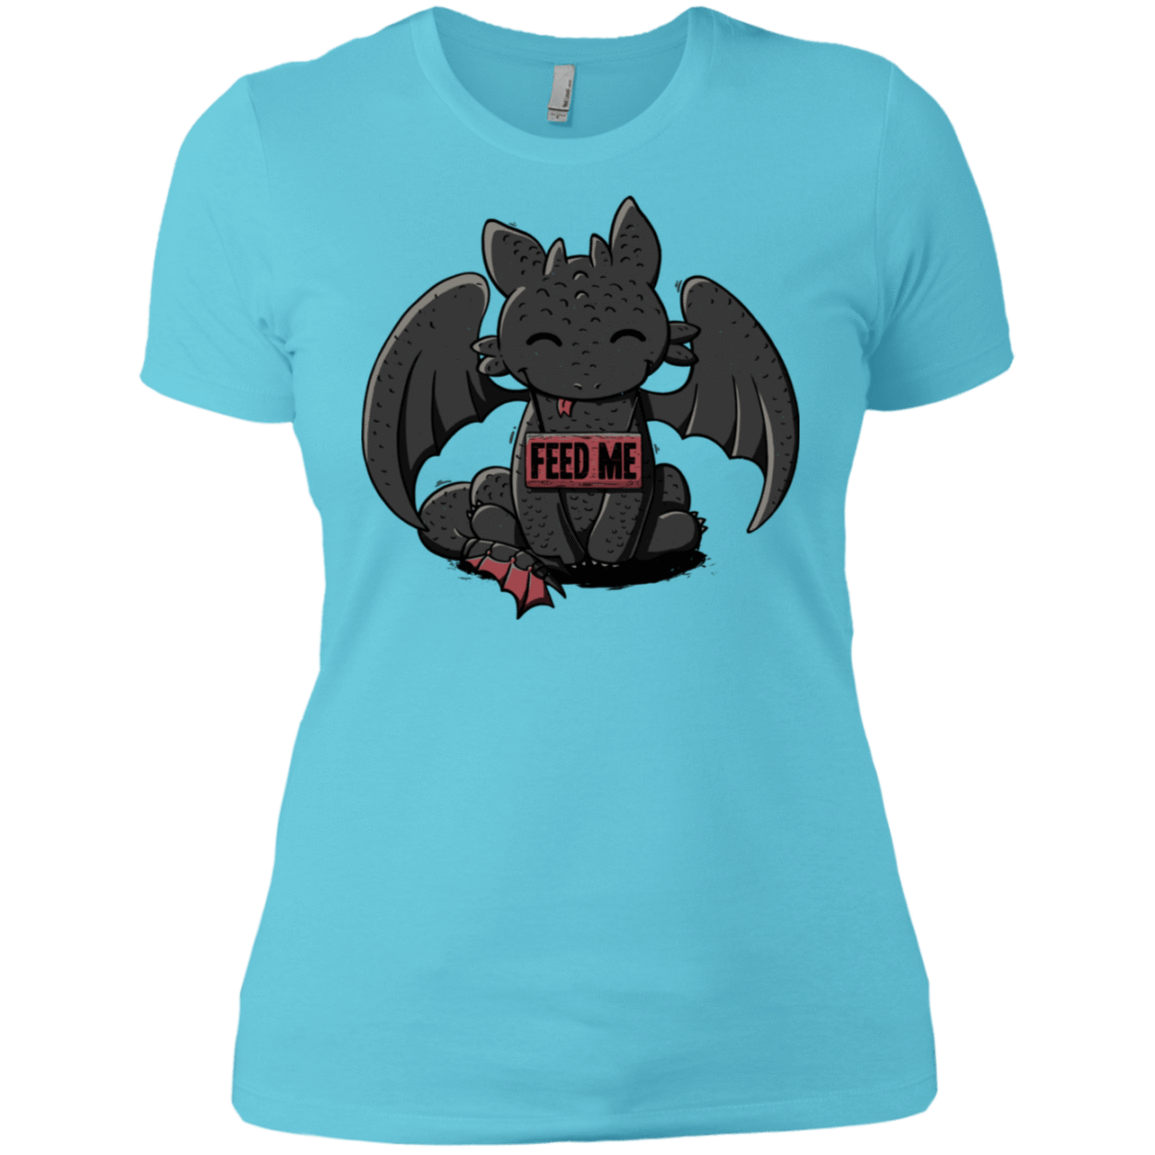 T-Shirts Cancun / X-Small Toothless Feed Me Women's Premium T-Shirt